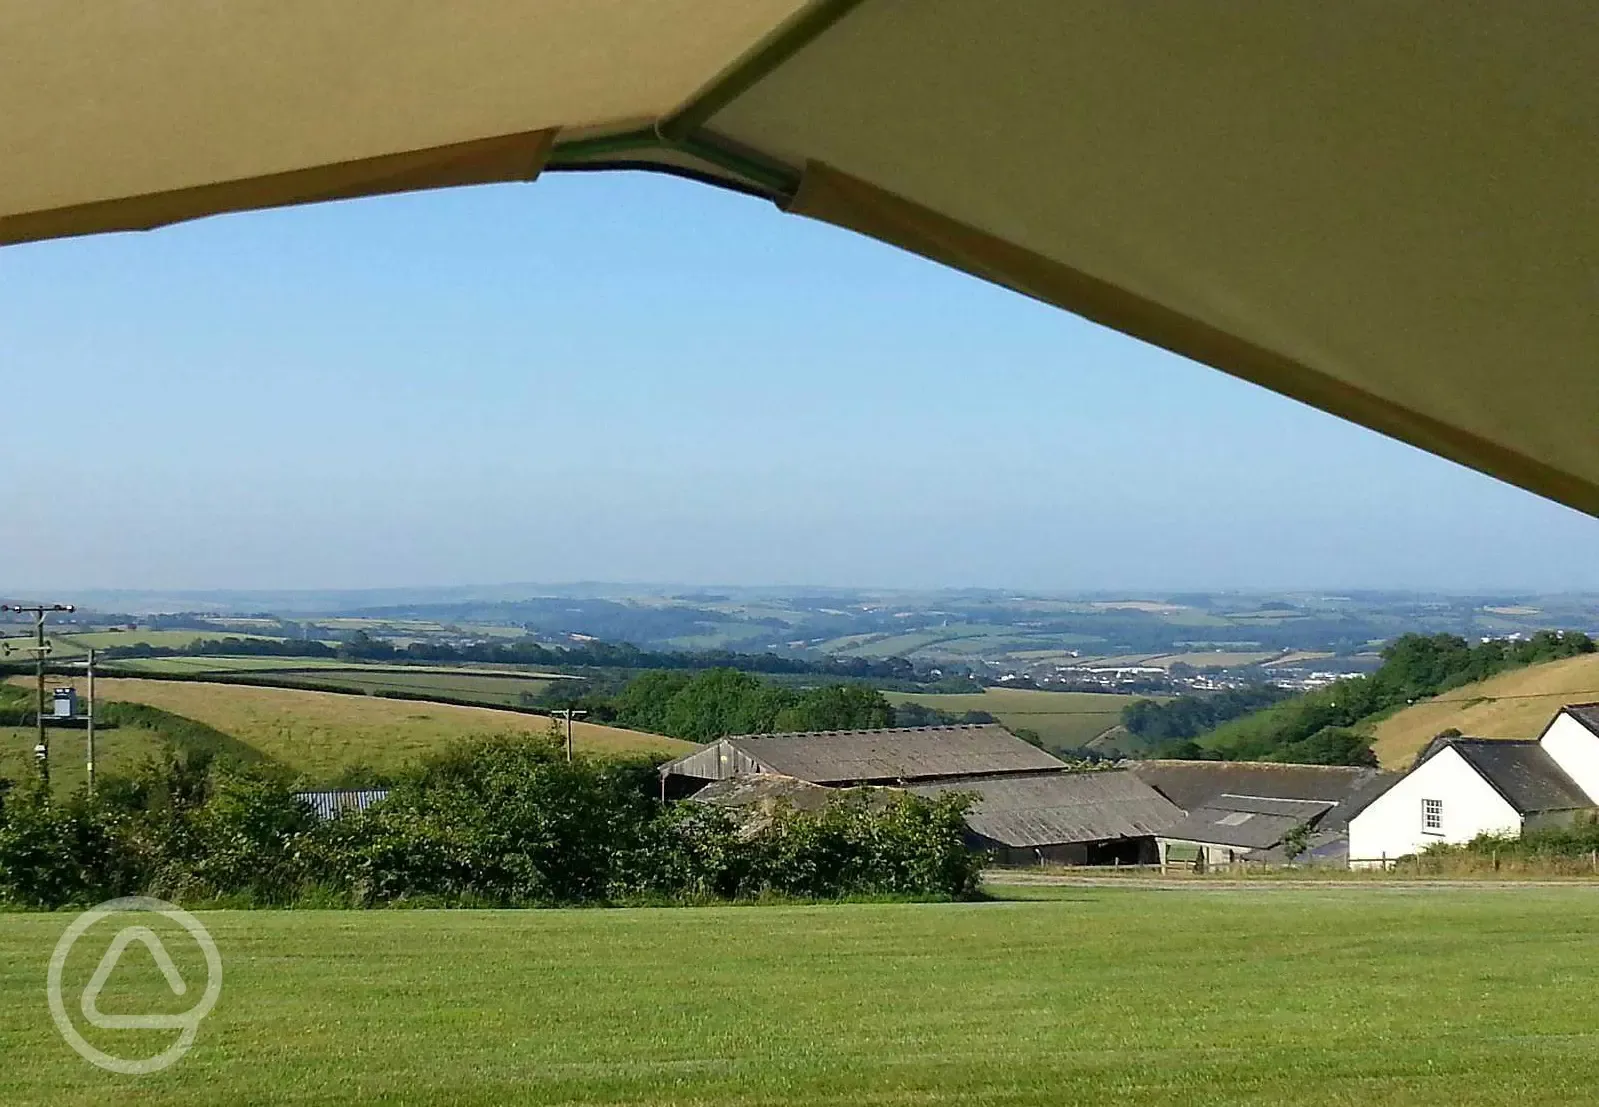 View from tent pitches Brightlycott Barton